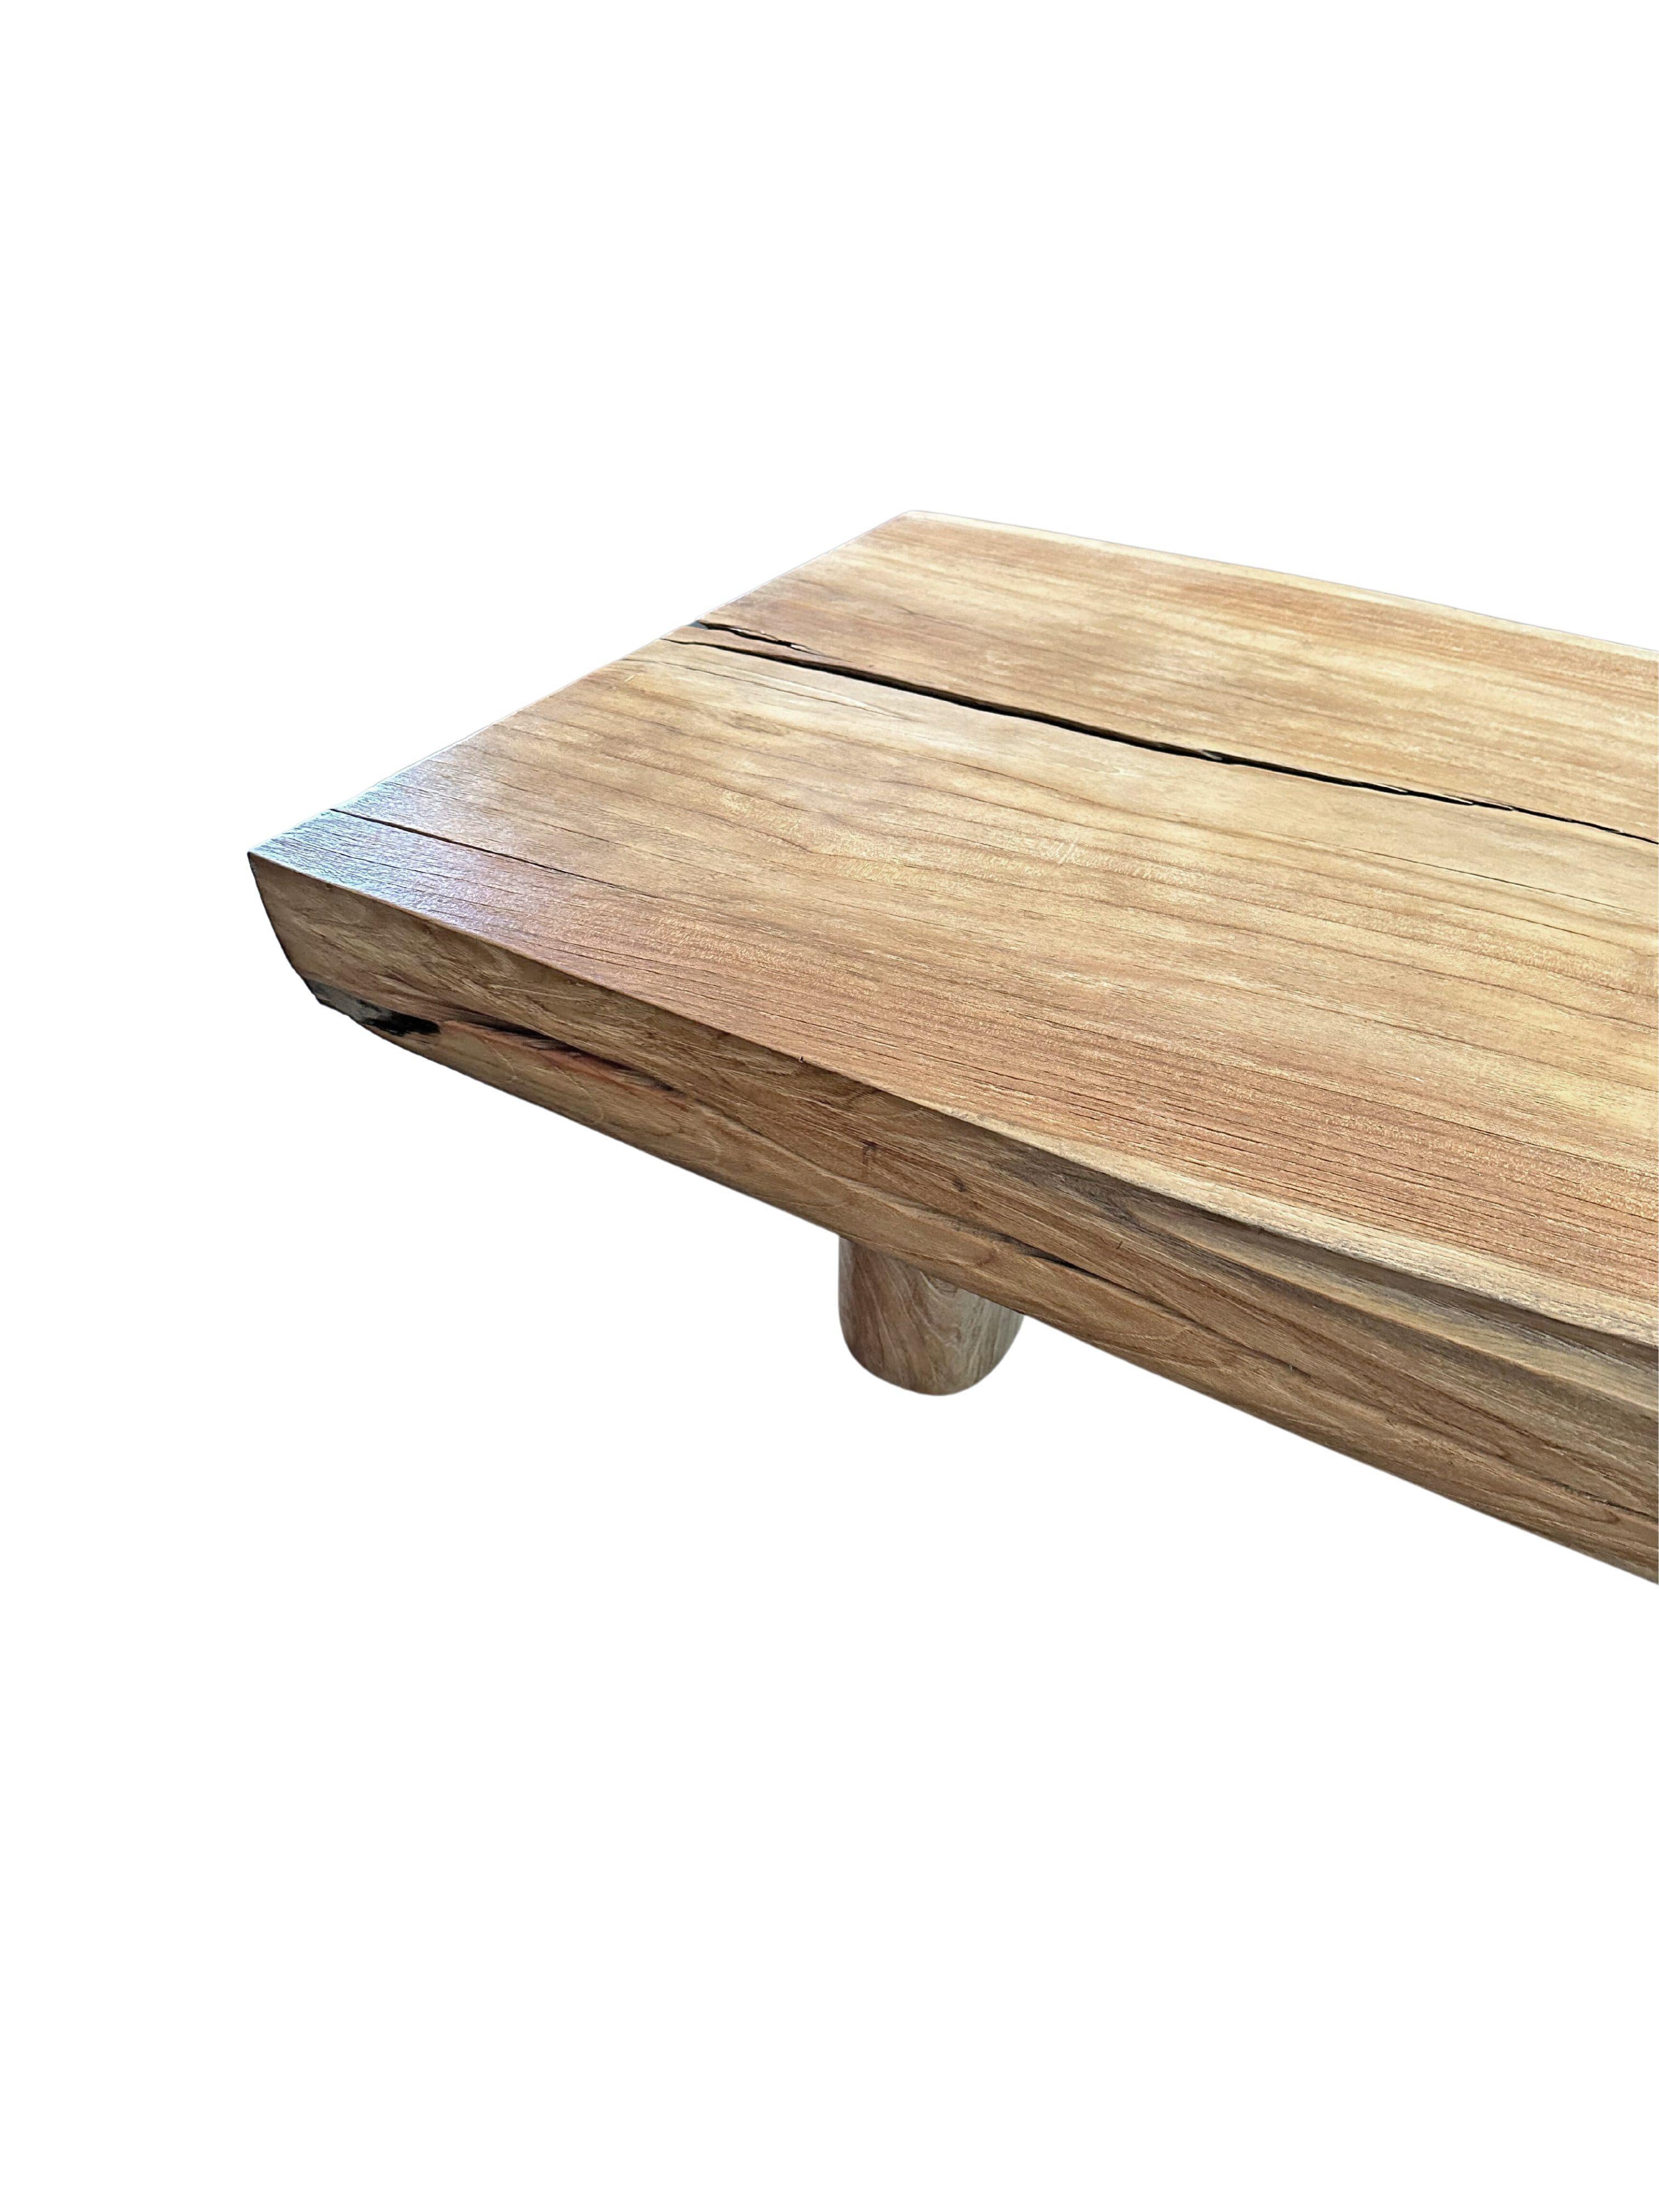 Contemporary Solid Teak Wood Table Modern Organic For Sale